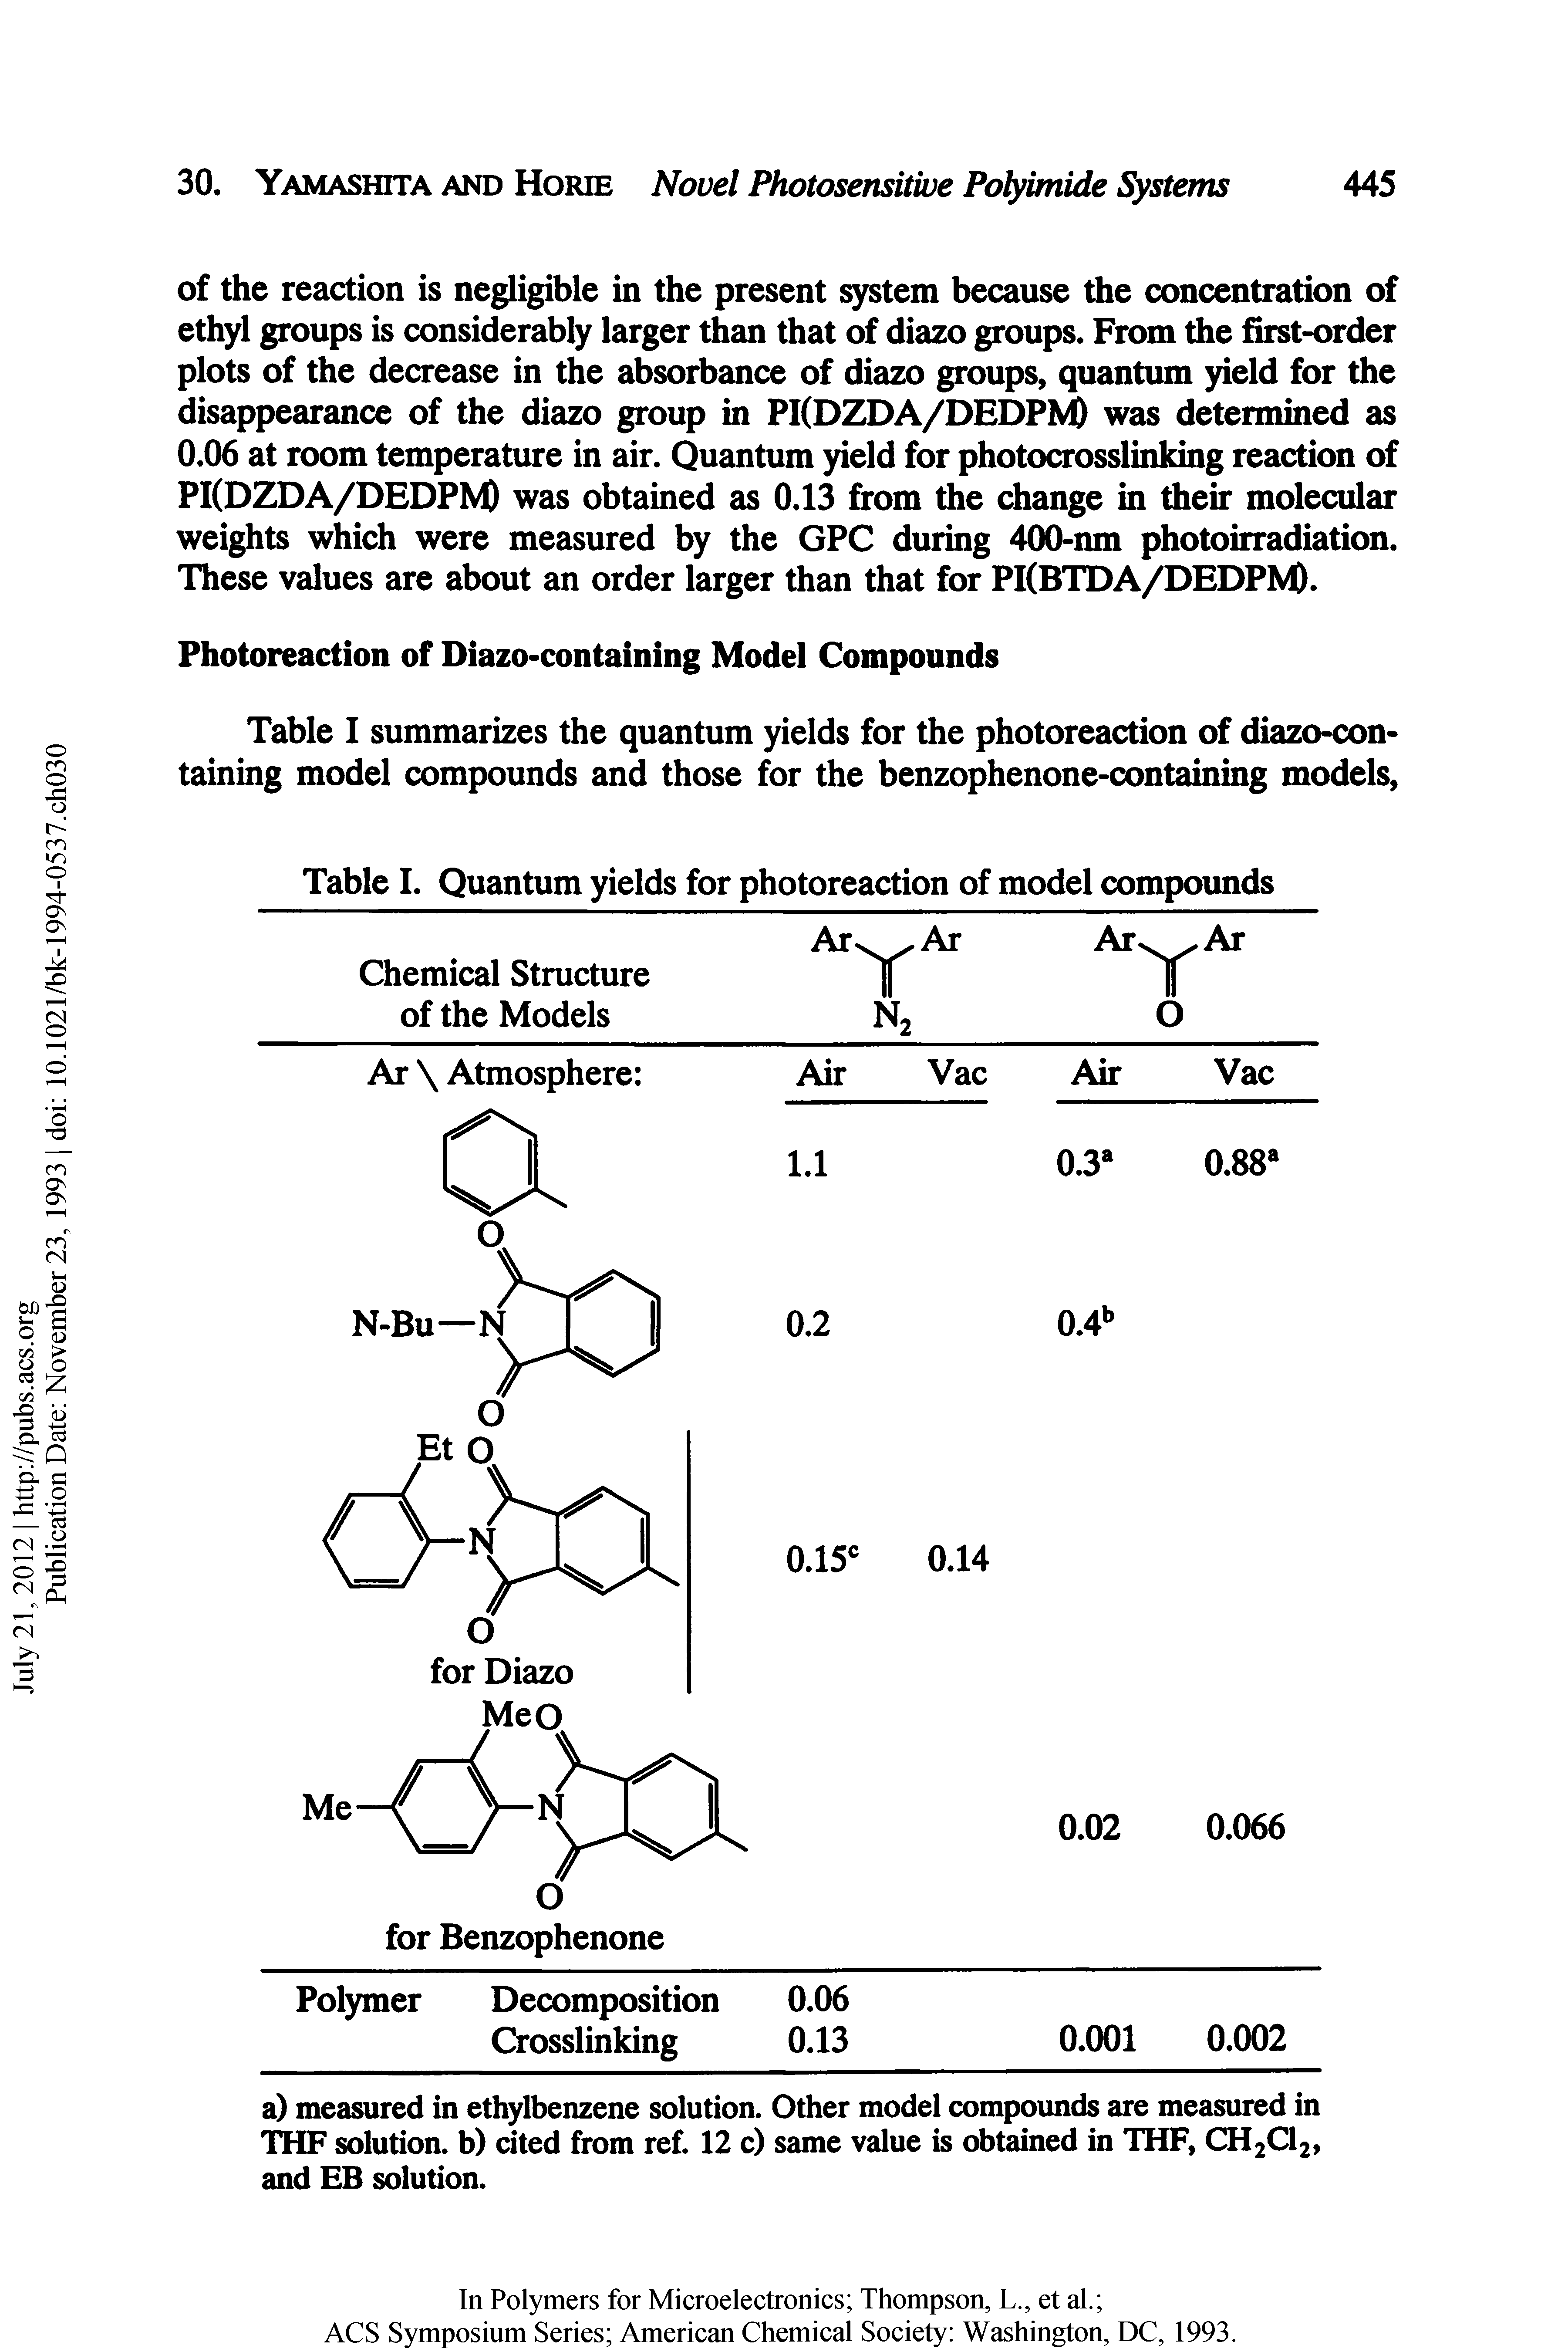 Table I. Quantum yields for photoreaction of model compounds...